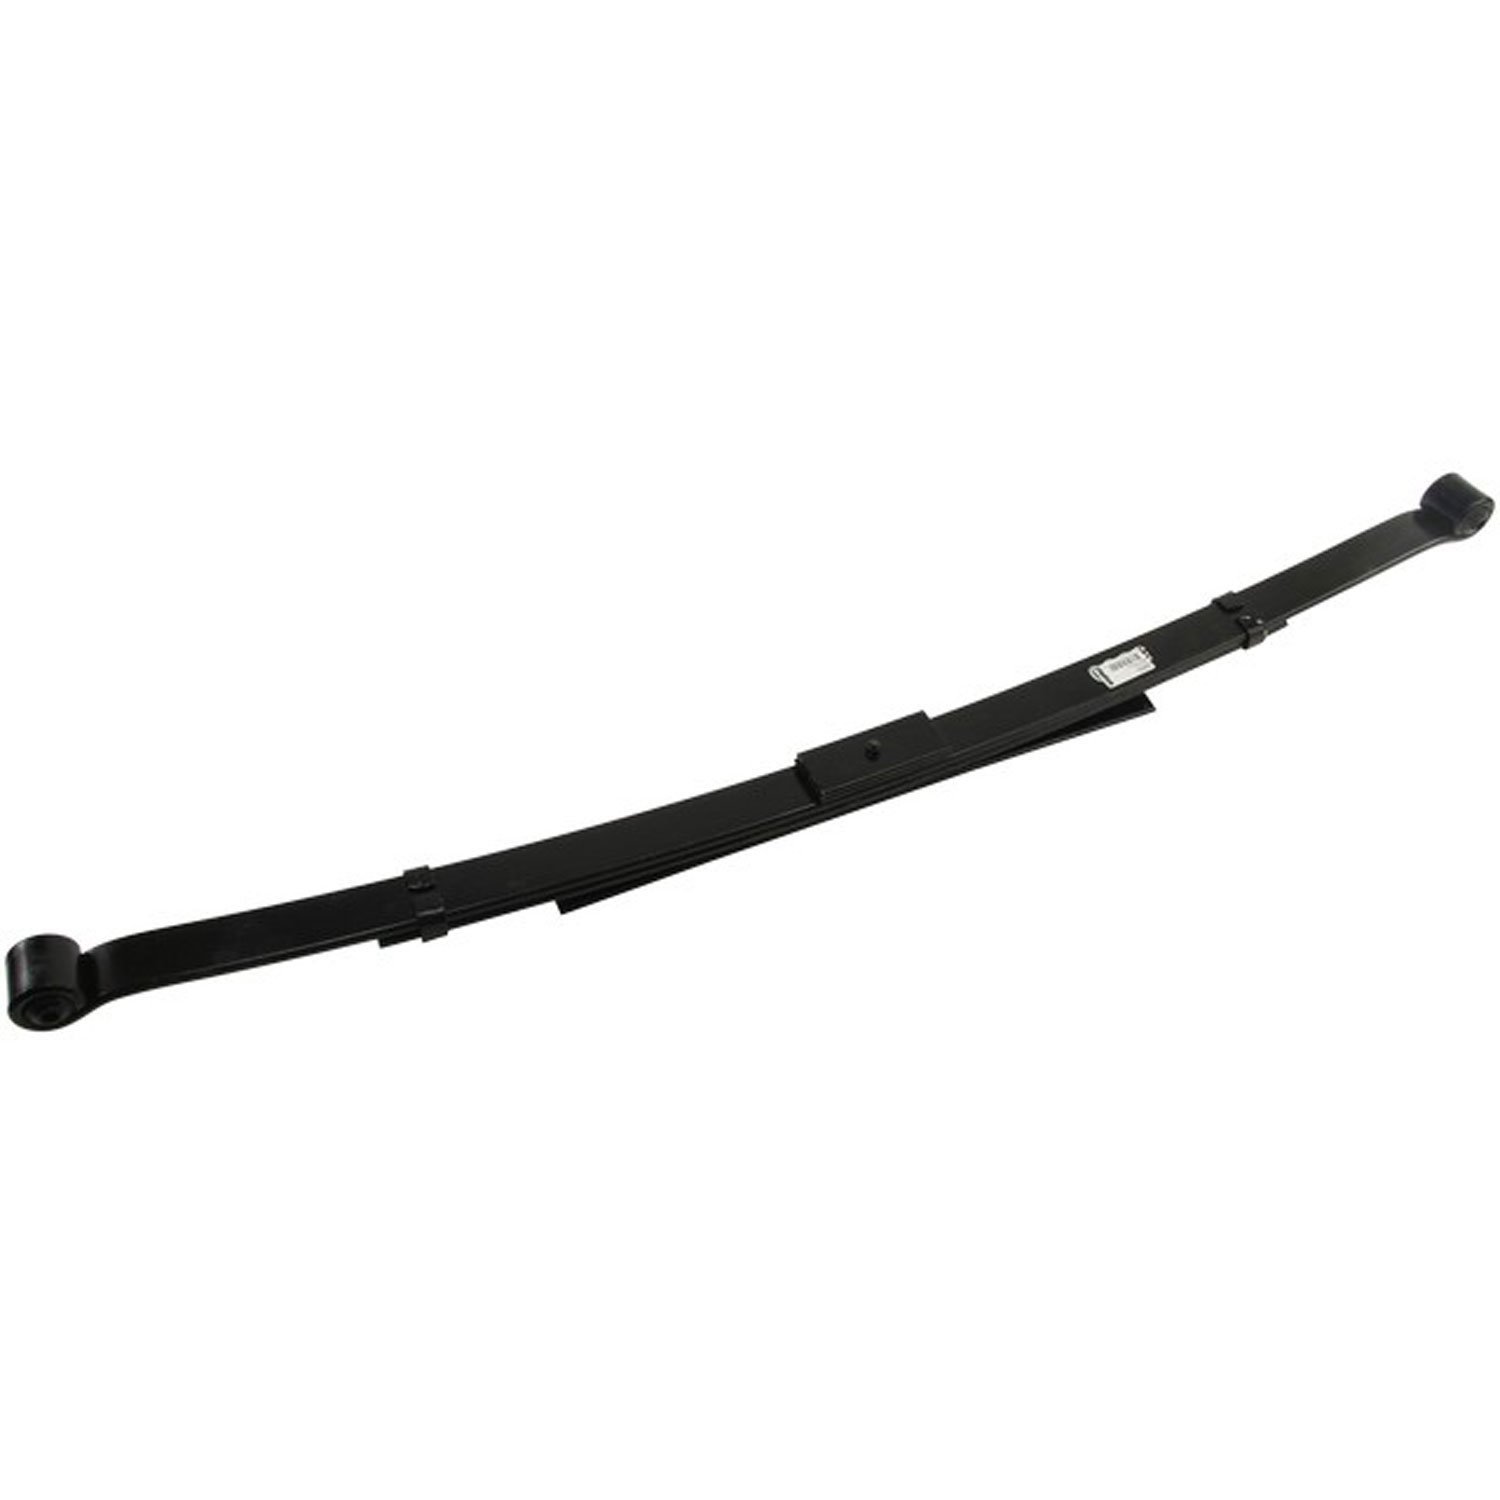 Rear Leaf Spring for 1964-1966 Ford Mustang Factory Ride Height